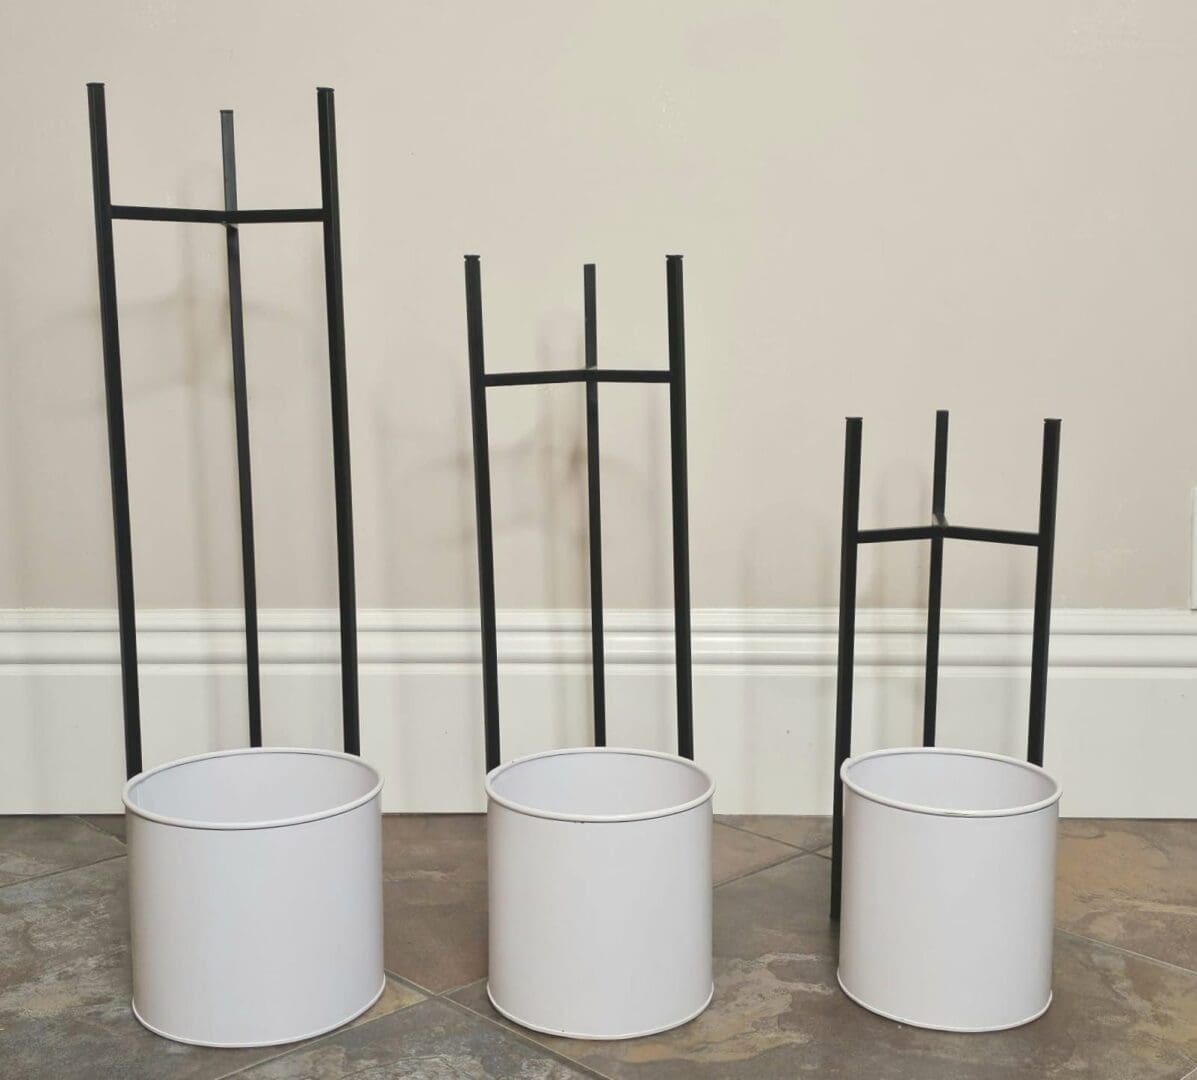 Three white buckets with black metal poles in them.